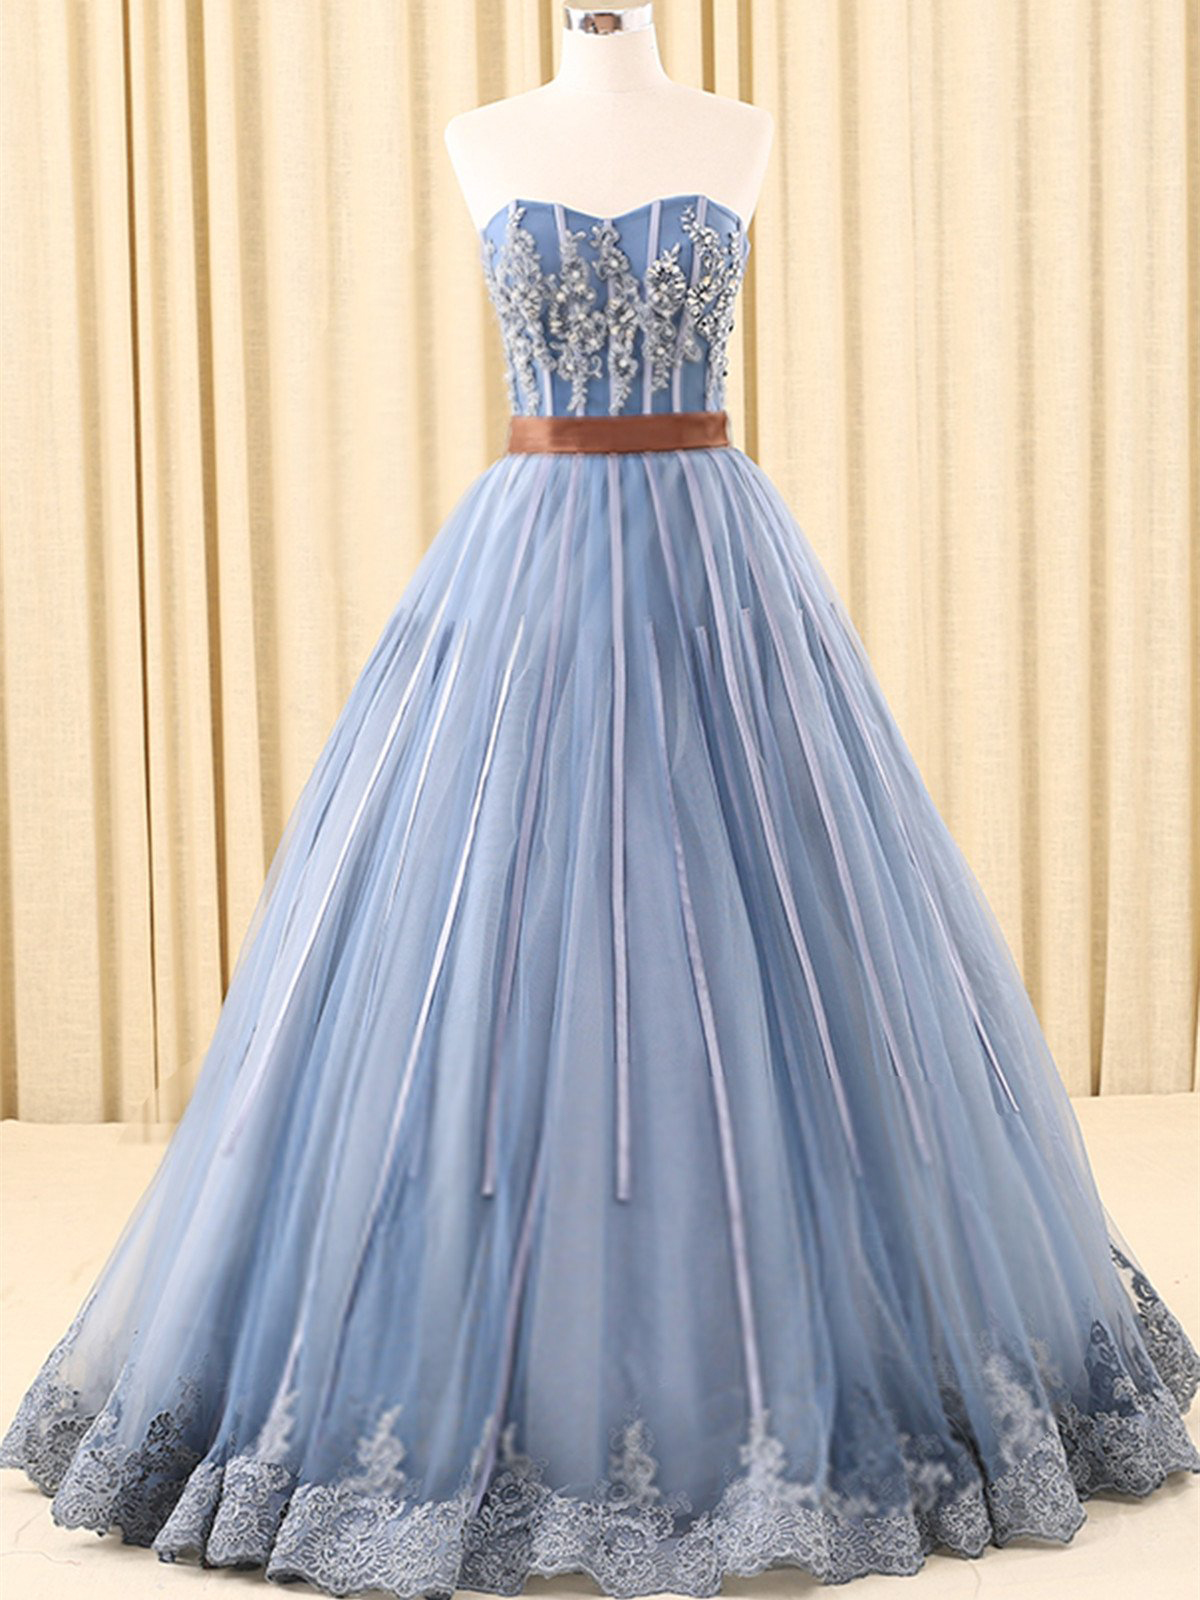 A-line Prom Gown,sweetheart Prom Dresses,floor-length Prom Dress,tulle Prom Dresses,blue Prom Dresses With Beading